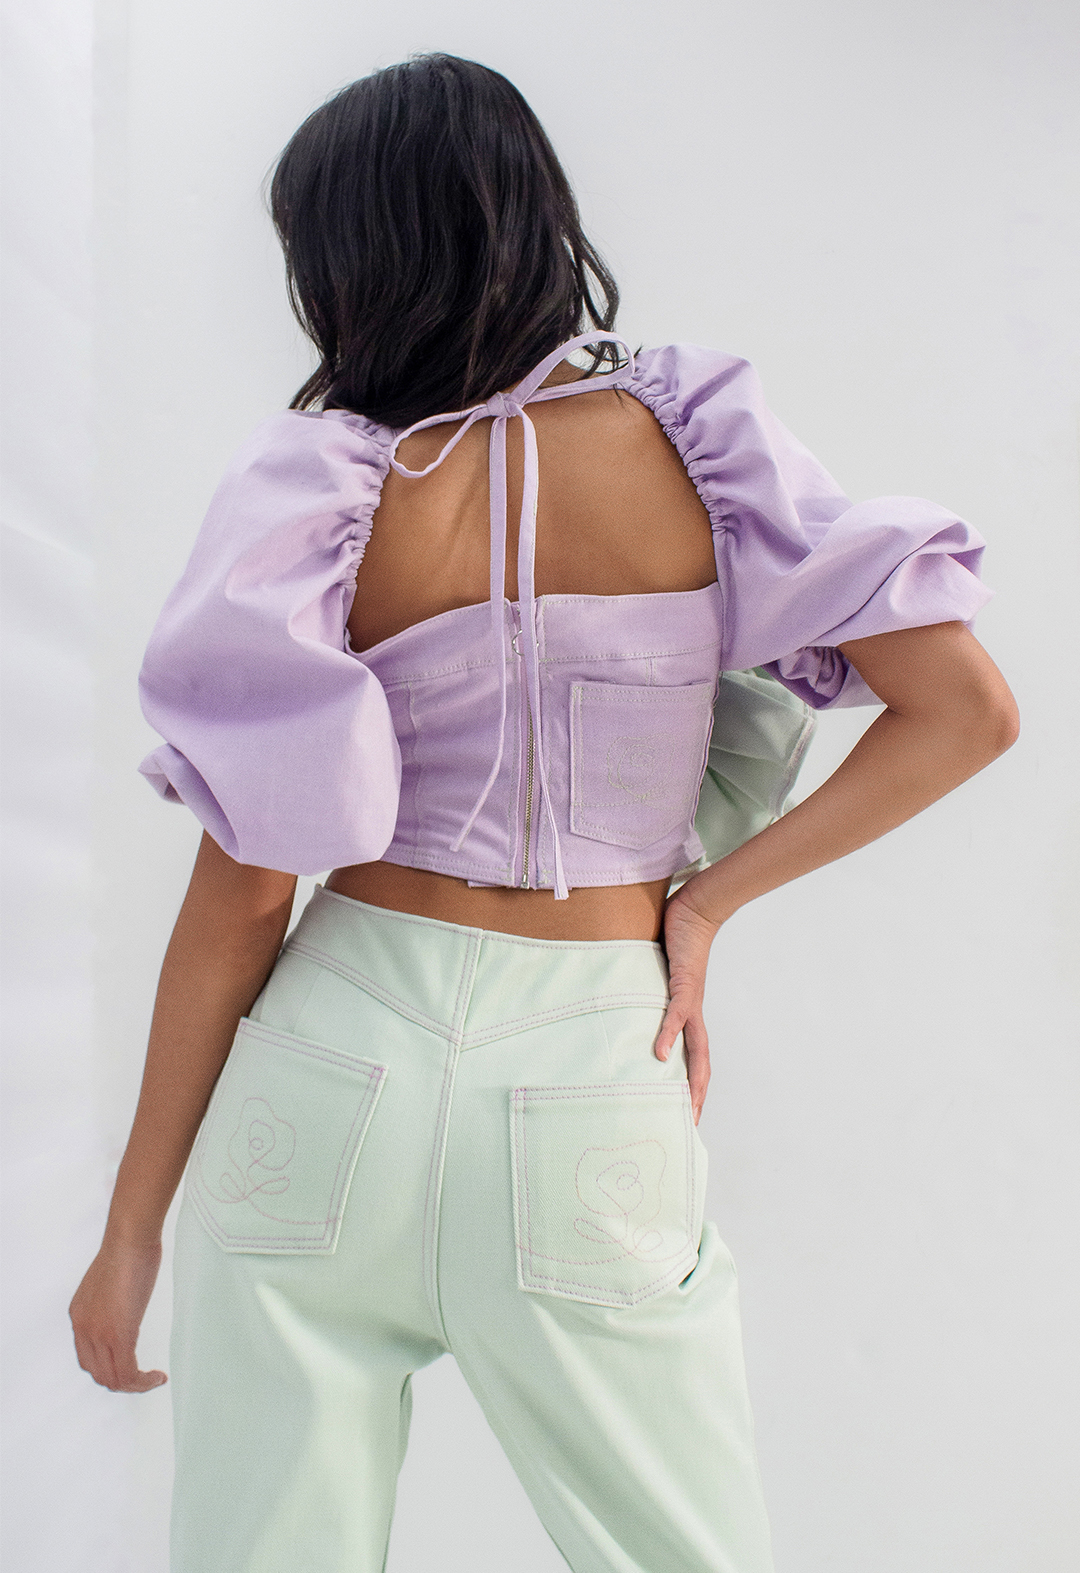 The look is designed with a clean cut and playful color and topstitched details to draw the attention of the audience. The embroidery details on the patched pocket at the back is one of the highlights of the garment. The delicate embroidery with contrasting colors adds some vivid energy to enlighten the look. 